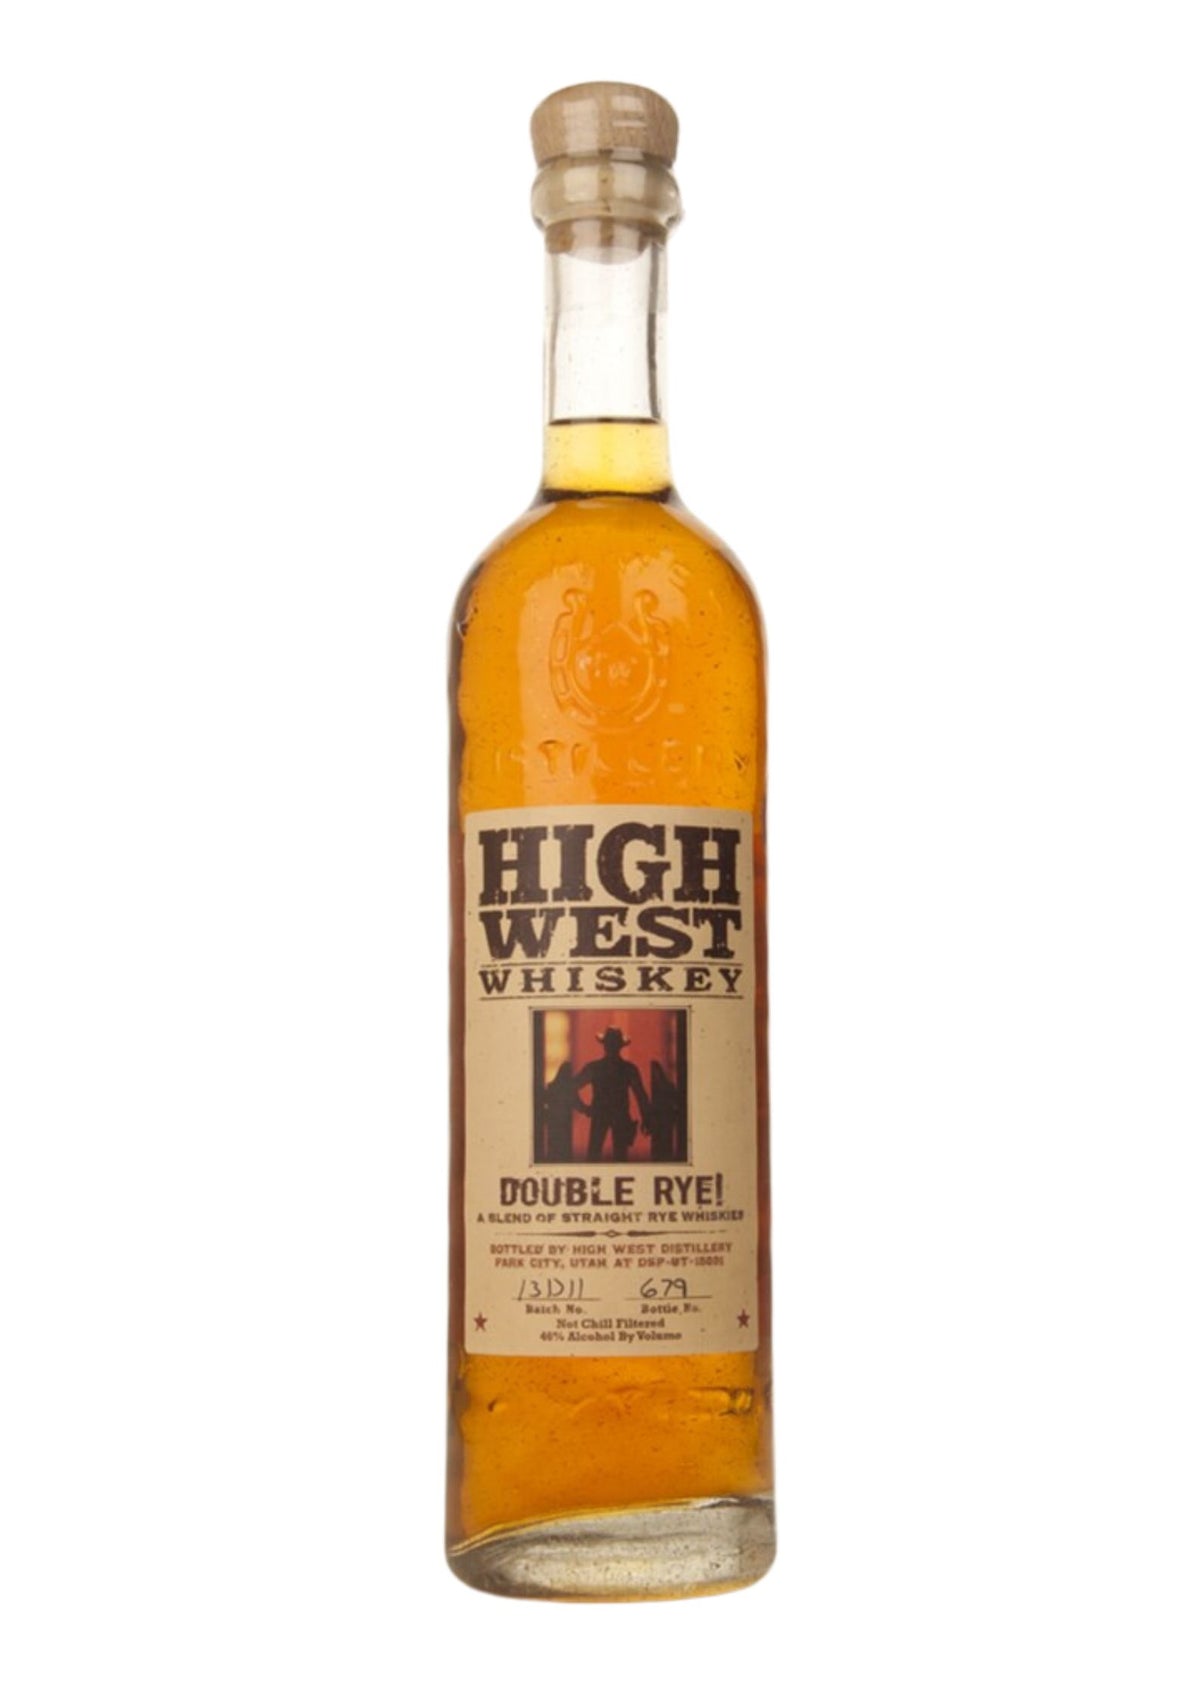 High West Double Rye! Whiskey, 46%